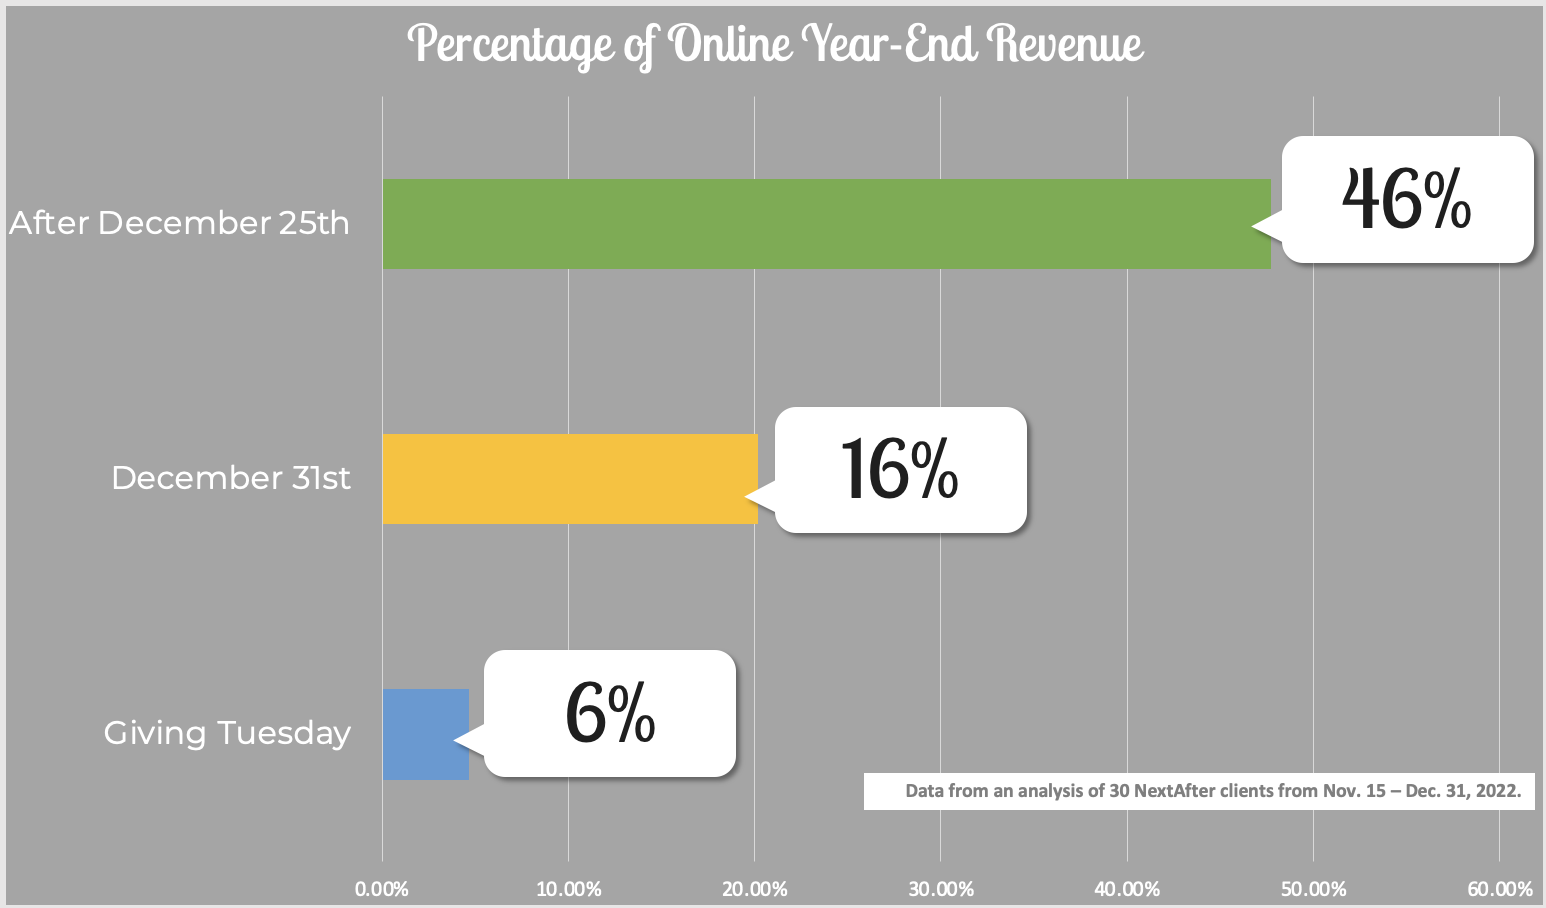 Bar graph showing the percentage of online year-end revenue for nonprofits or Dec 25, Dec 31, and Giving Tuesday